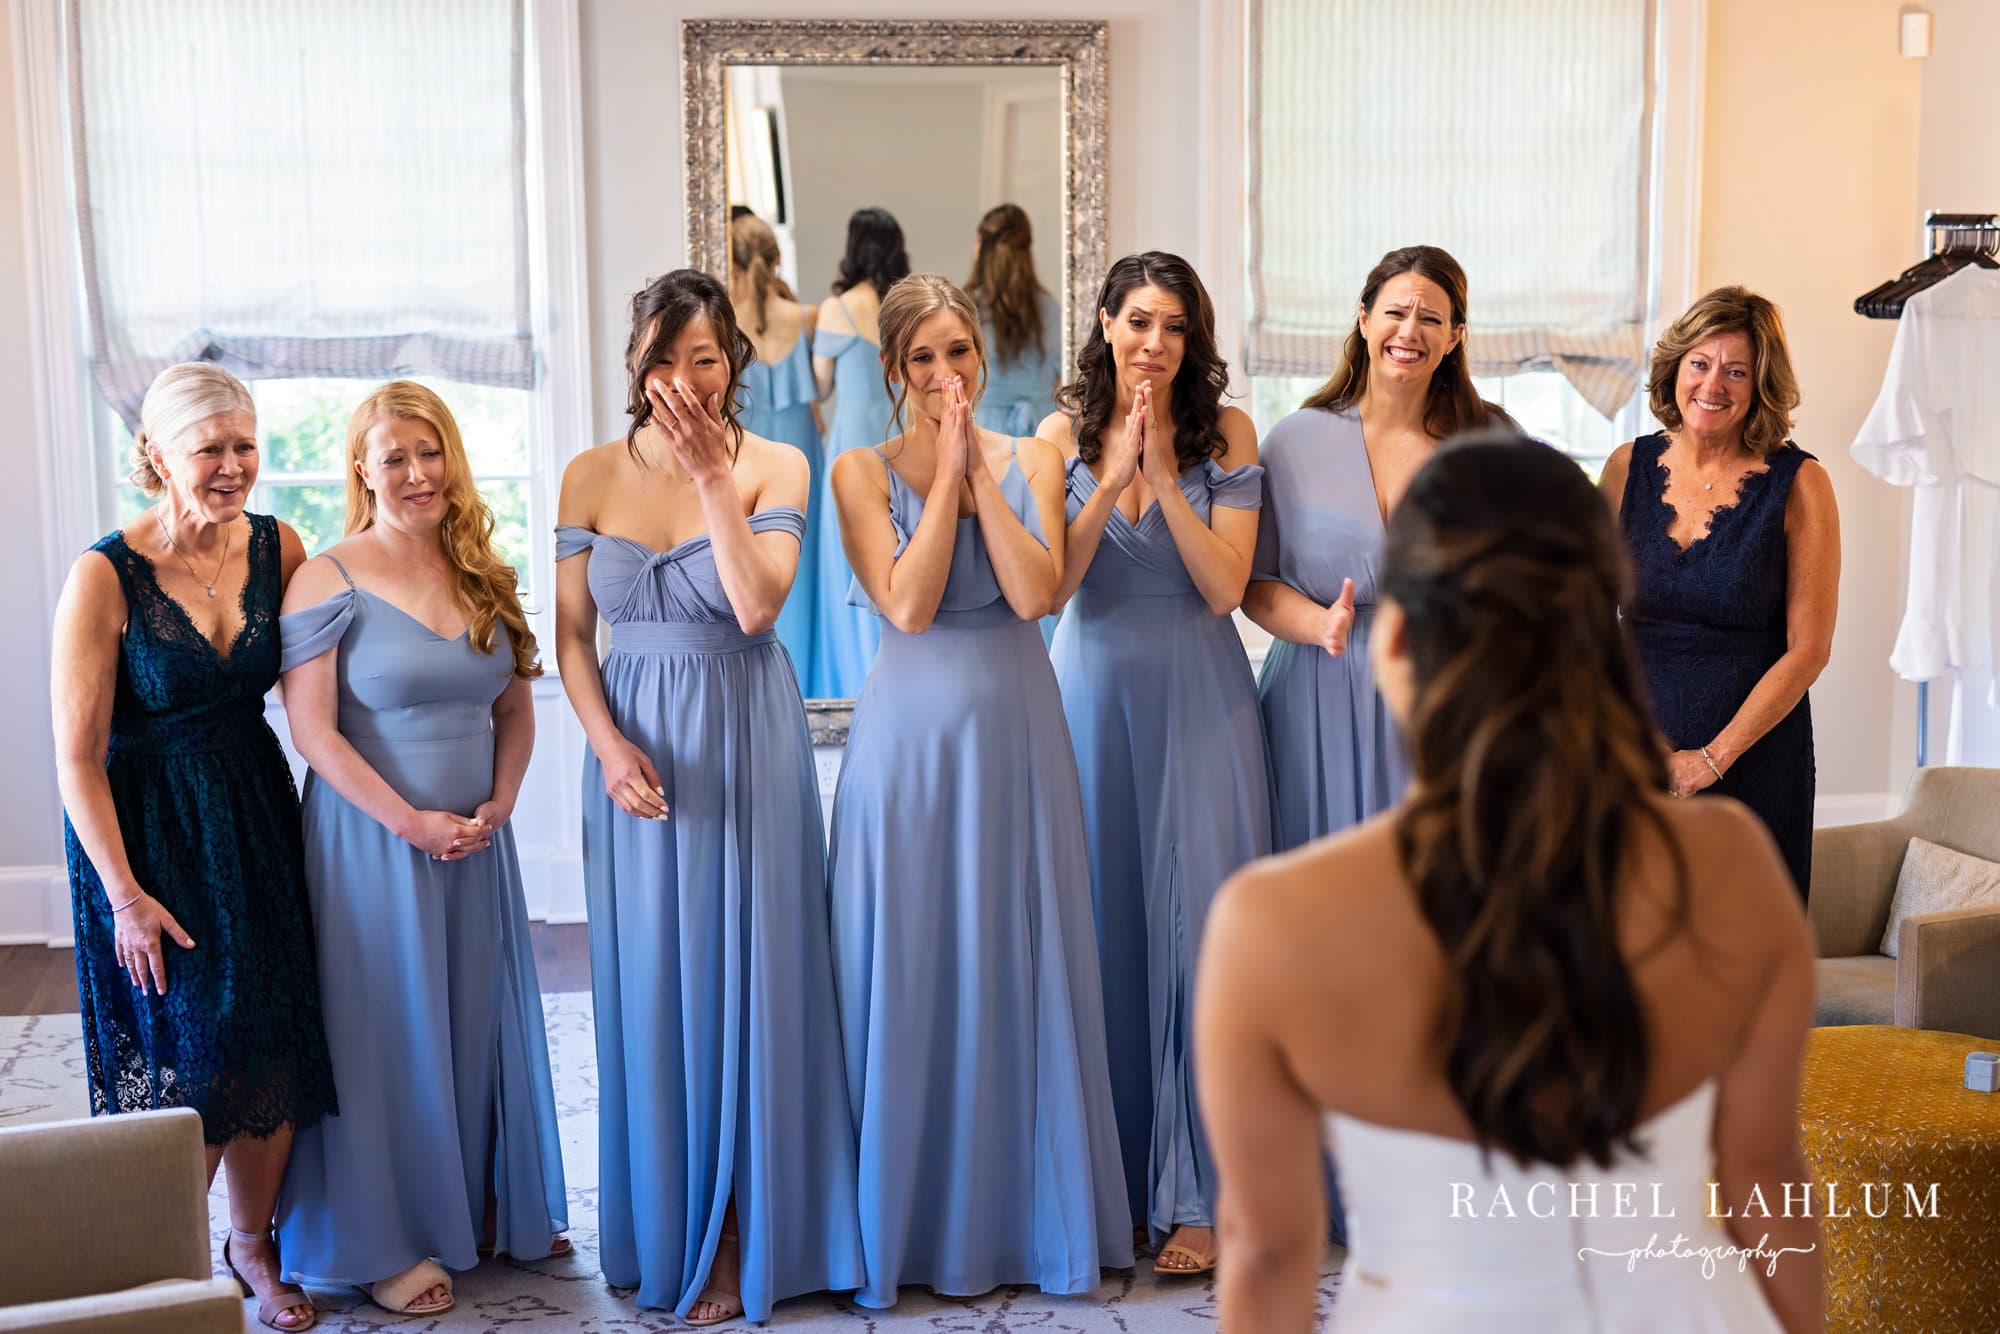 Bridesmaids in blue shed tears after seeing bride in wedding dress at The Blaisdell.